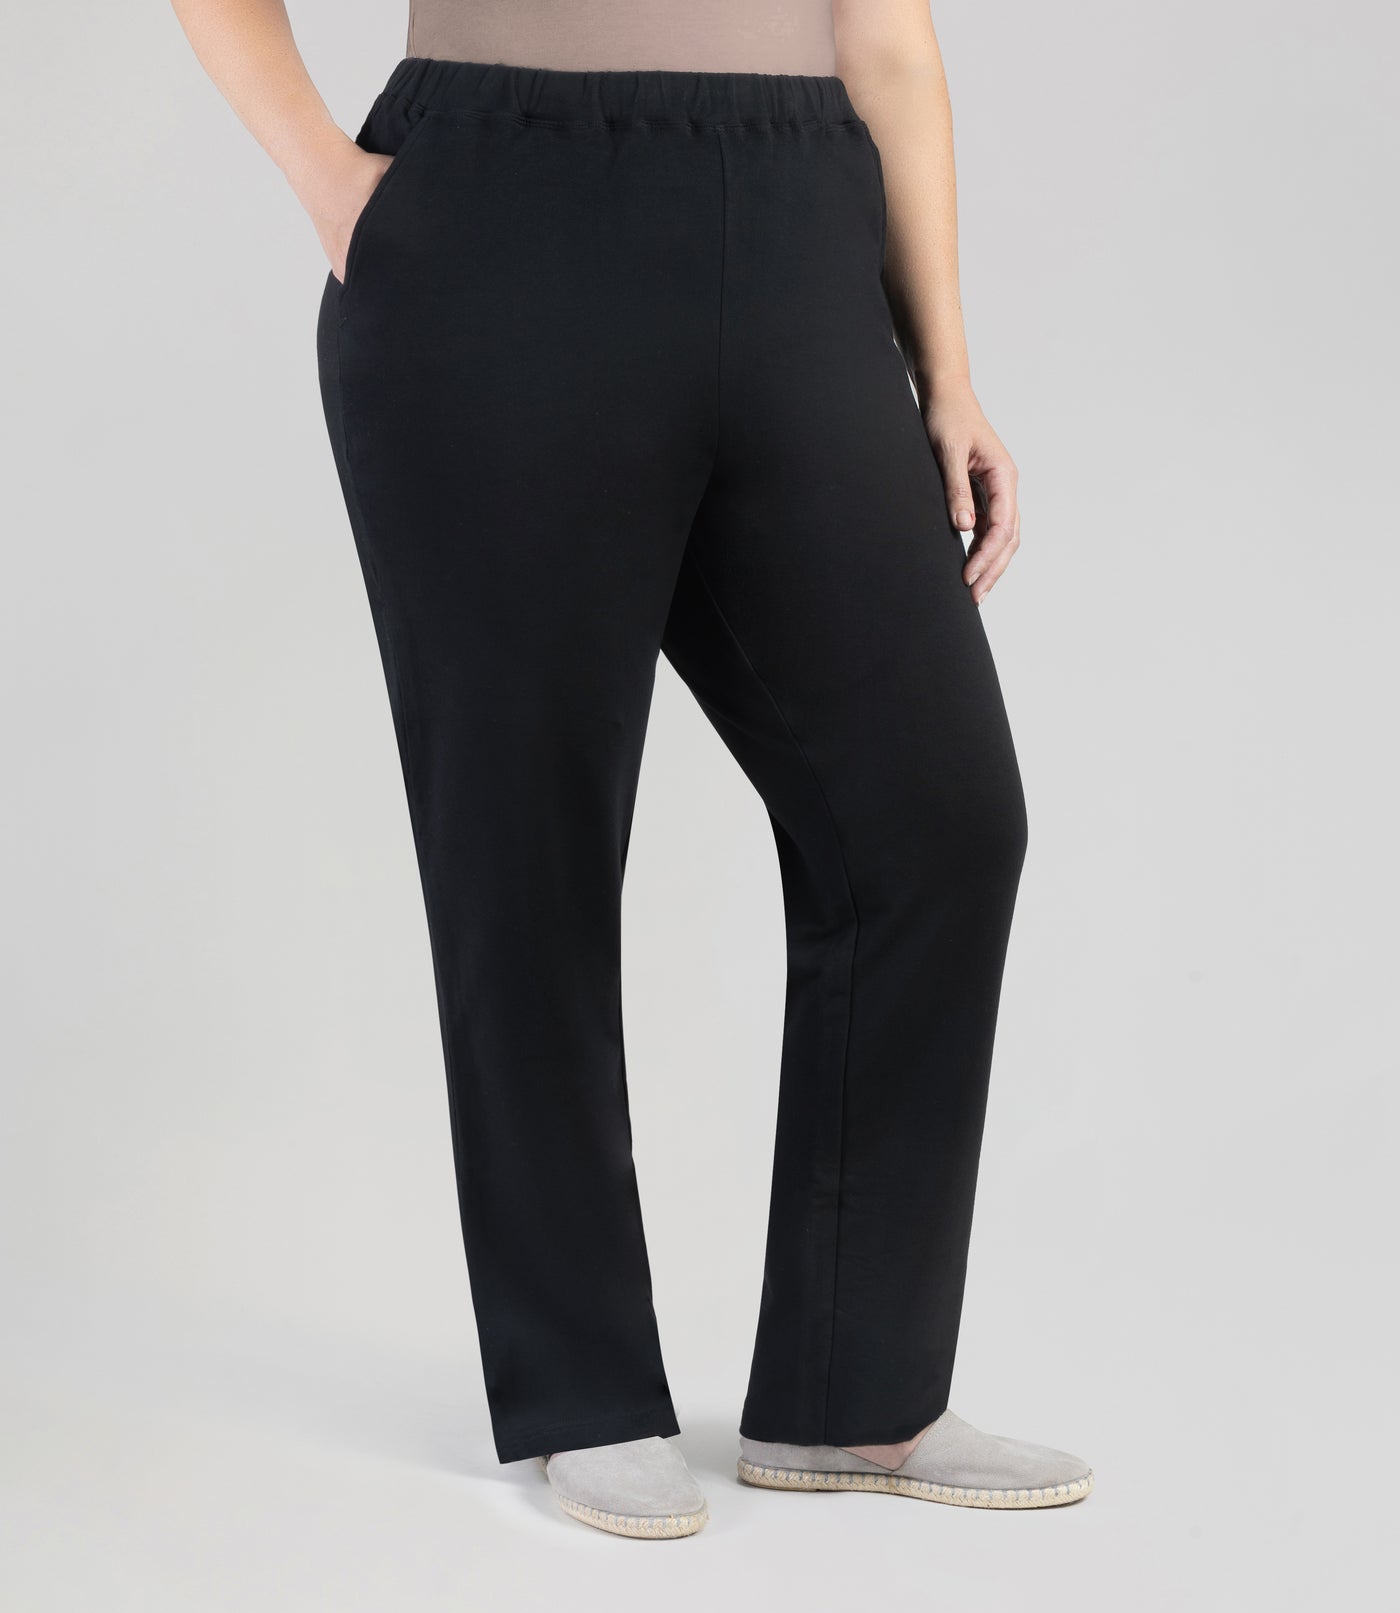 Plus size woman facing front, wearing JunoActive's MaVie Pocketed Pant in black. One hand is in pocket and other is by side.